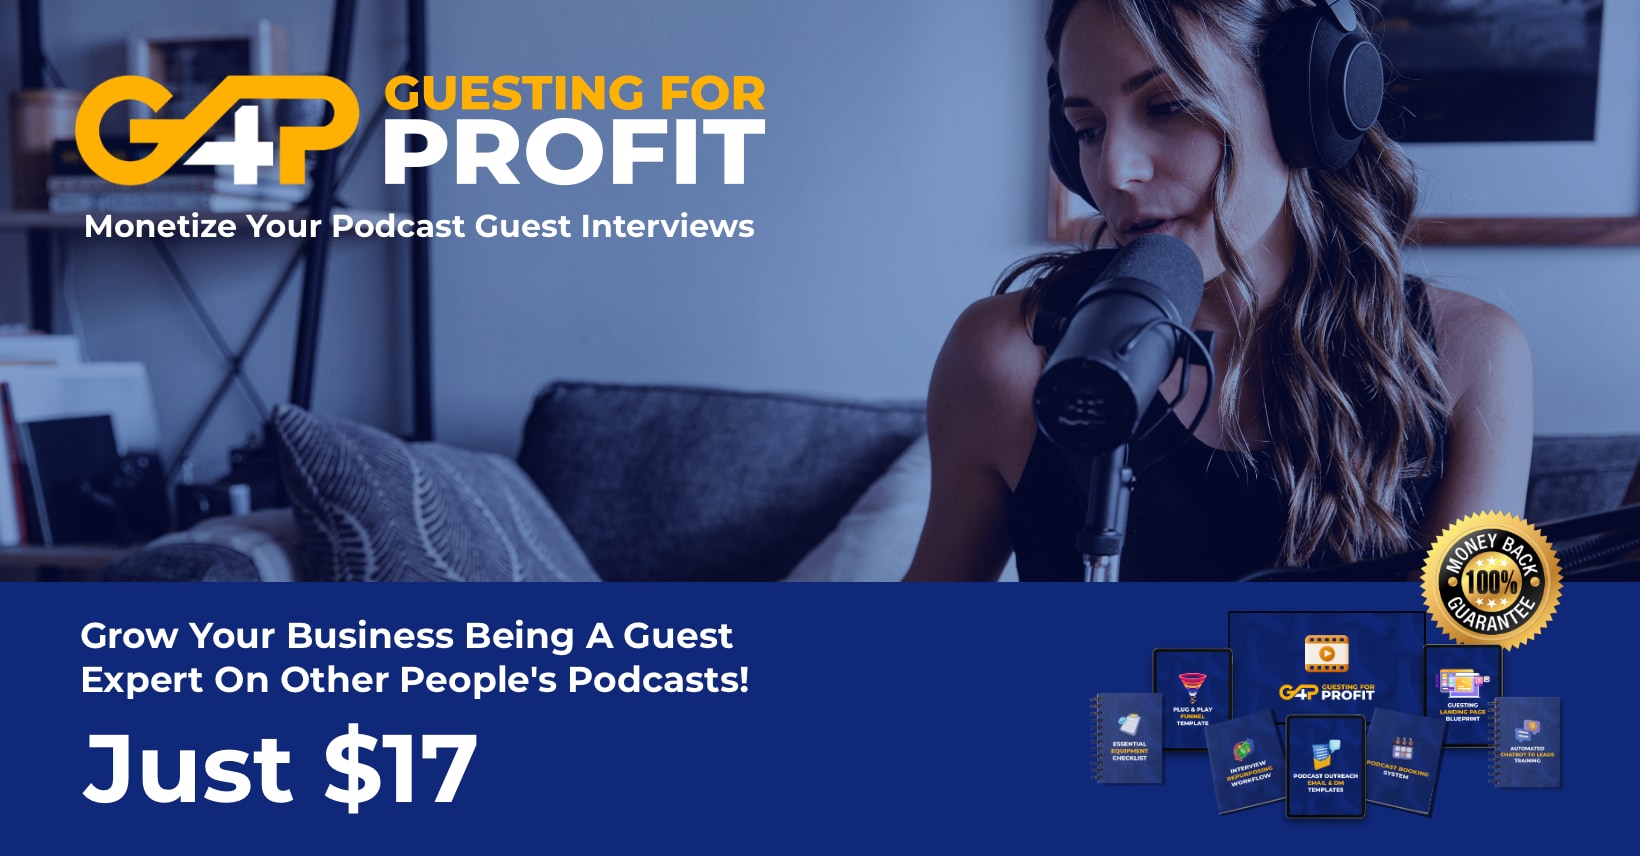 Guesting For Profit - Monetize Your Podcast Guest Interviews